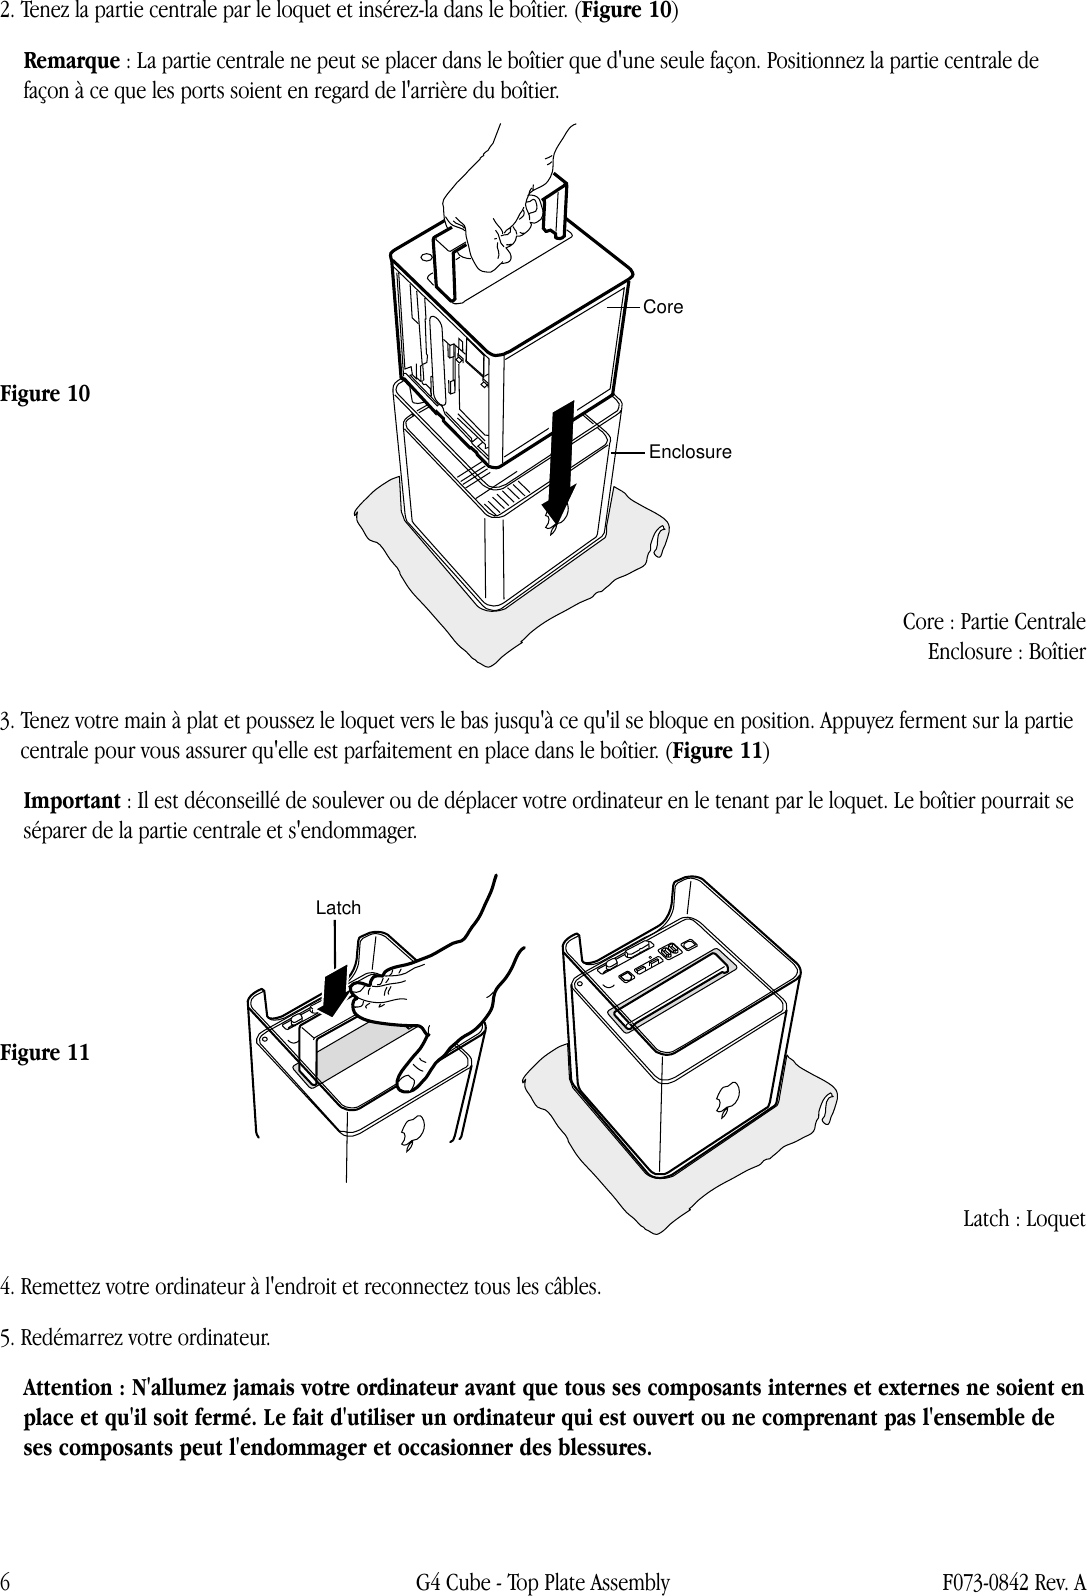 Page 6 of 7 - Apple Power Mac G4(Cube) Top Plate Assembly User Manual Power Mac G4(Cube)-Couvercle-Instructionsde Remplacement 073-0842-a